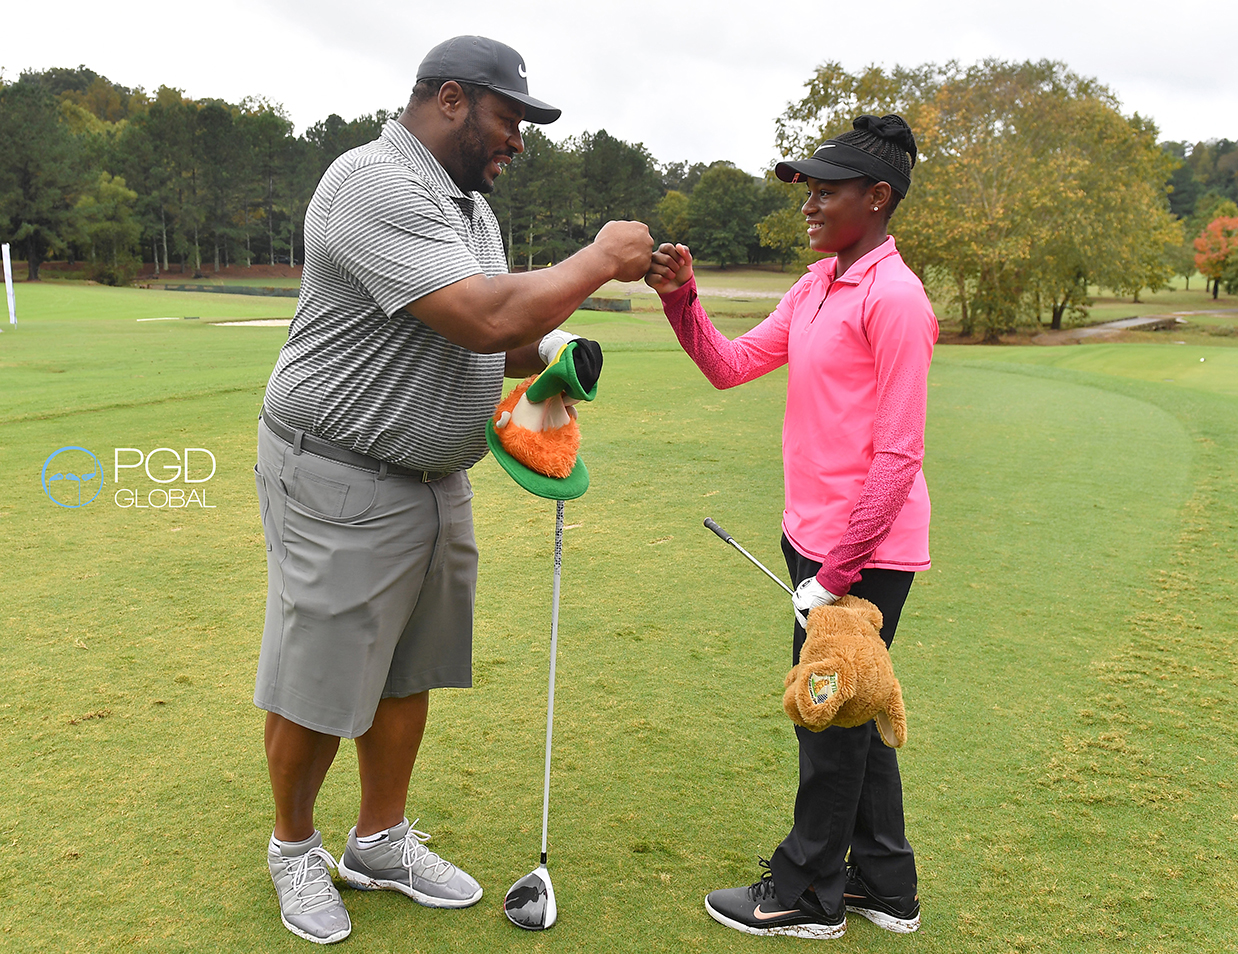 Jerome Bettis, NFL Hall of Fame and Ariel Collins, US Kids World Champion fist bump on the first tee after being granted the 2020 Calvin Peete Award recipients.